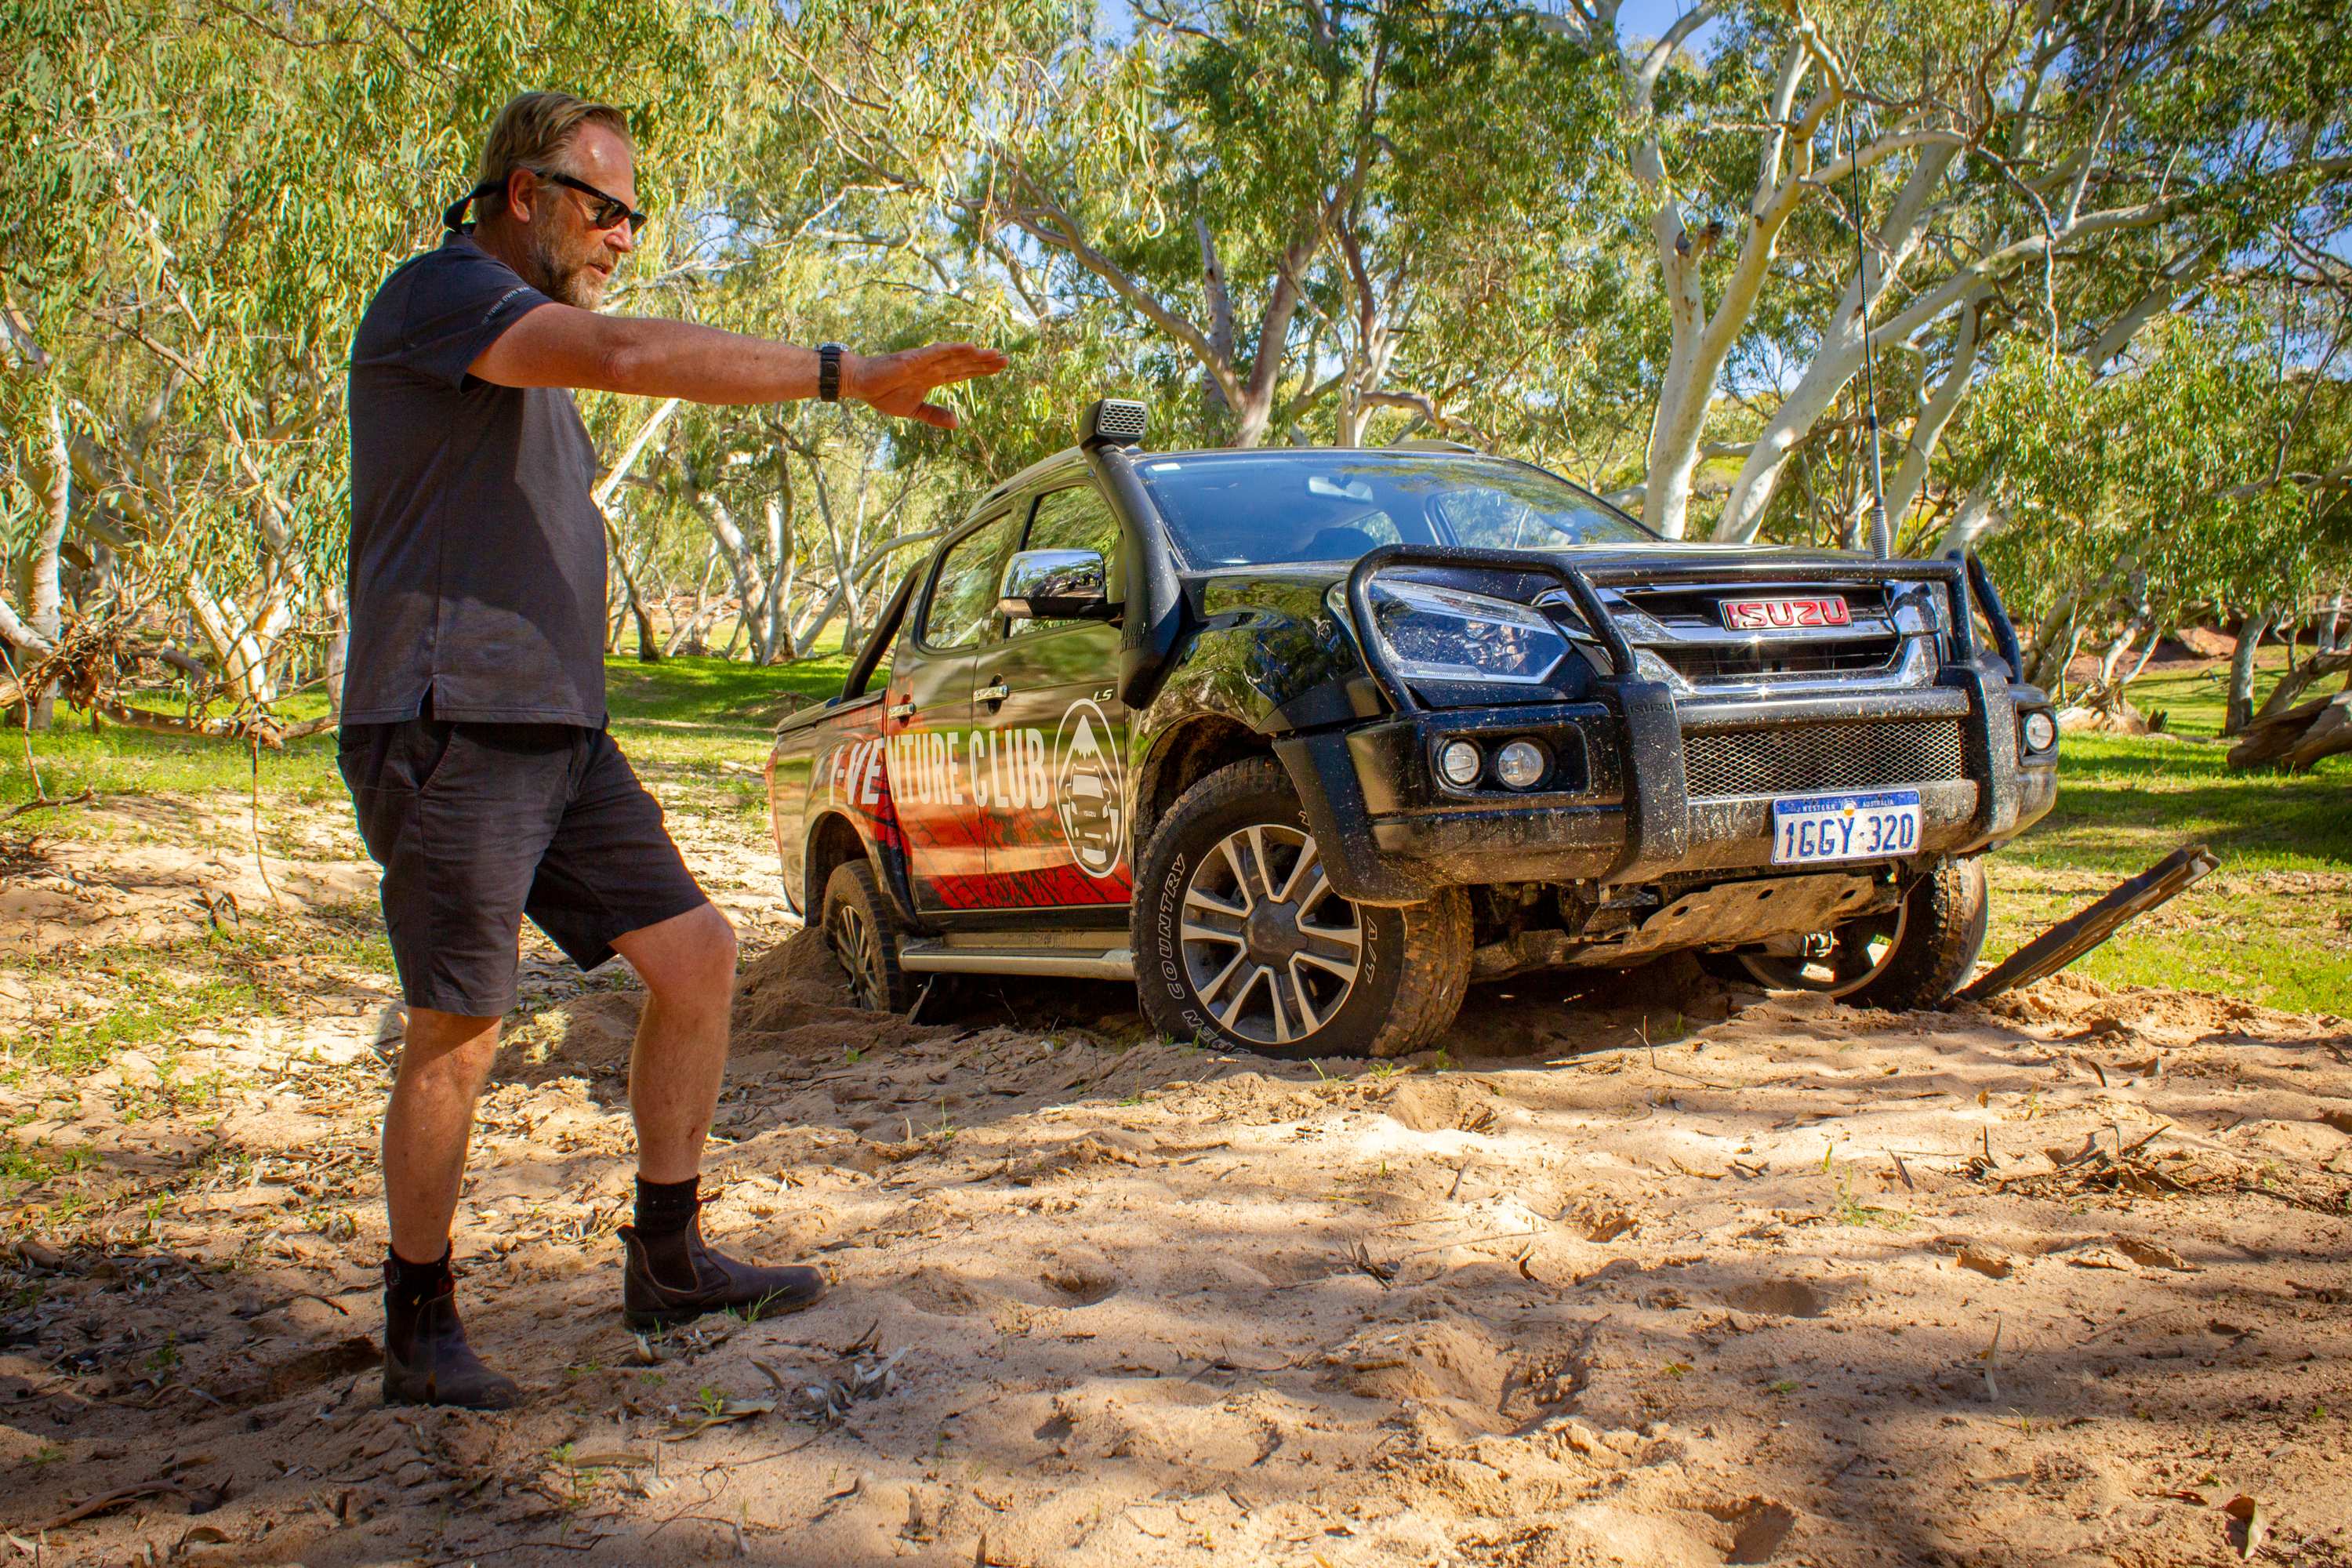 Isuzu D-MAX and MU-X drivers across the country actively continue to engage with Australia's only vehicle manufacturer initiative of its kind that incorporates driver training days and extended training tours throughout the year—further enabling Isuzu owners to Go Their Own Way under the guidance of accredited 4x4 instructors.